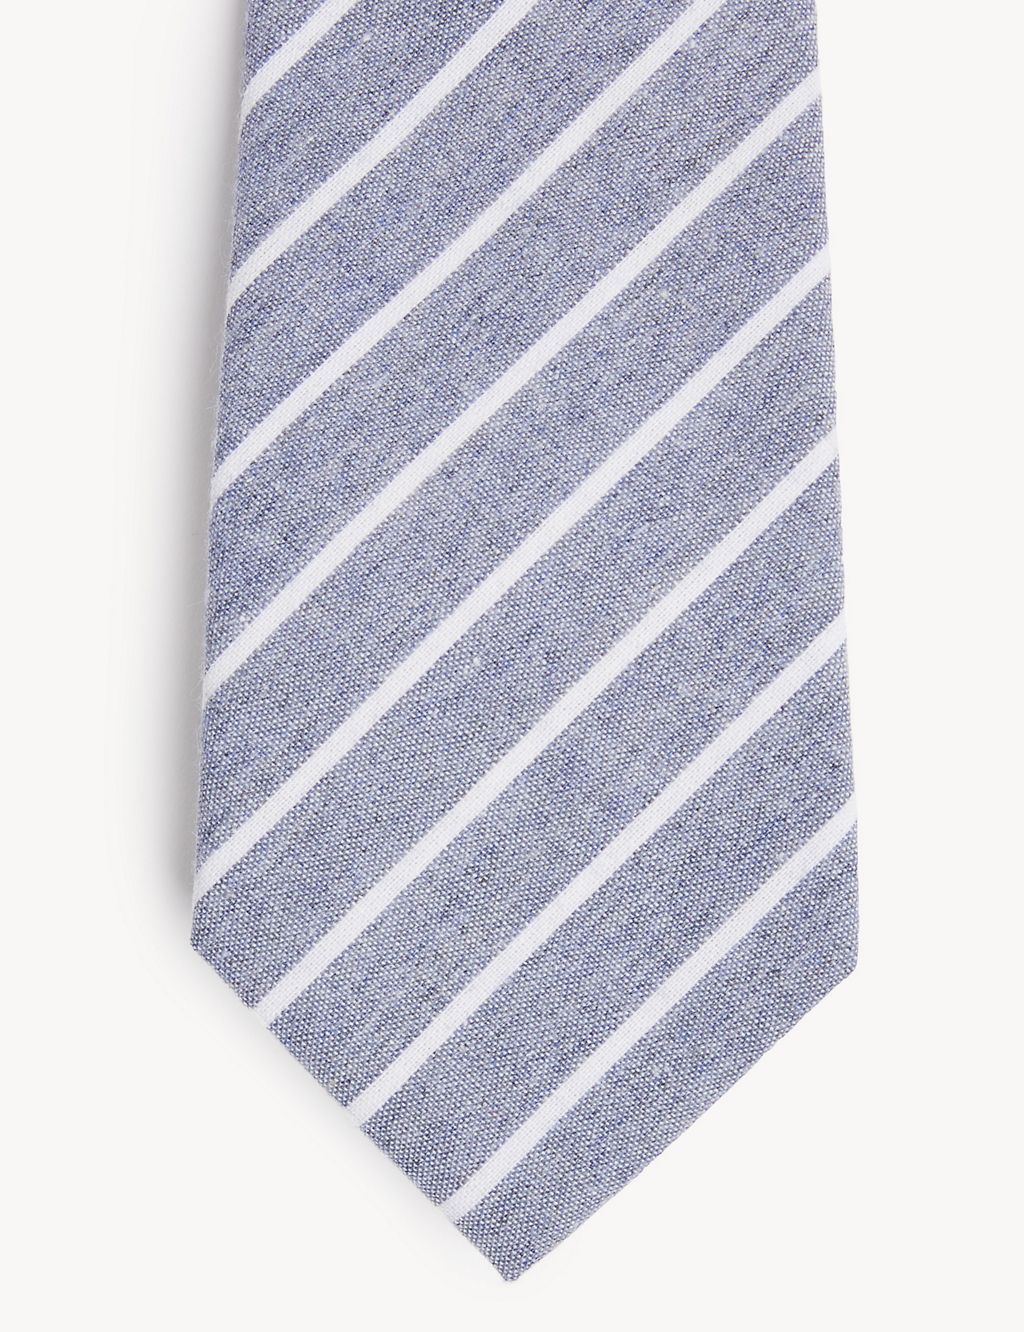 Striped Tie 2 of 4